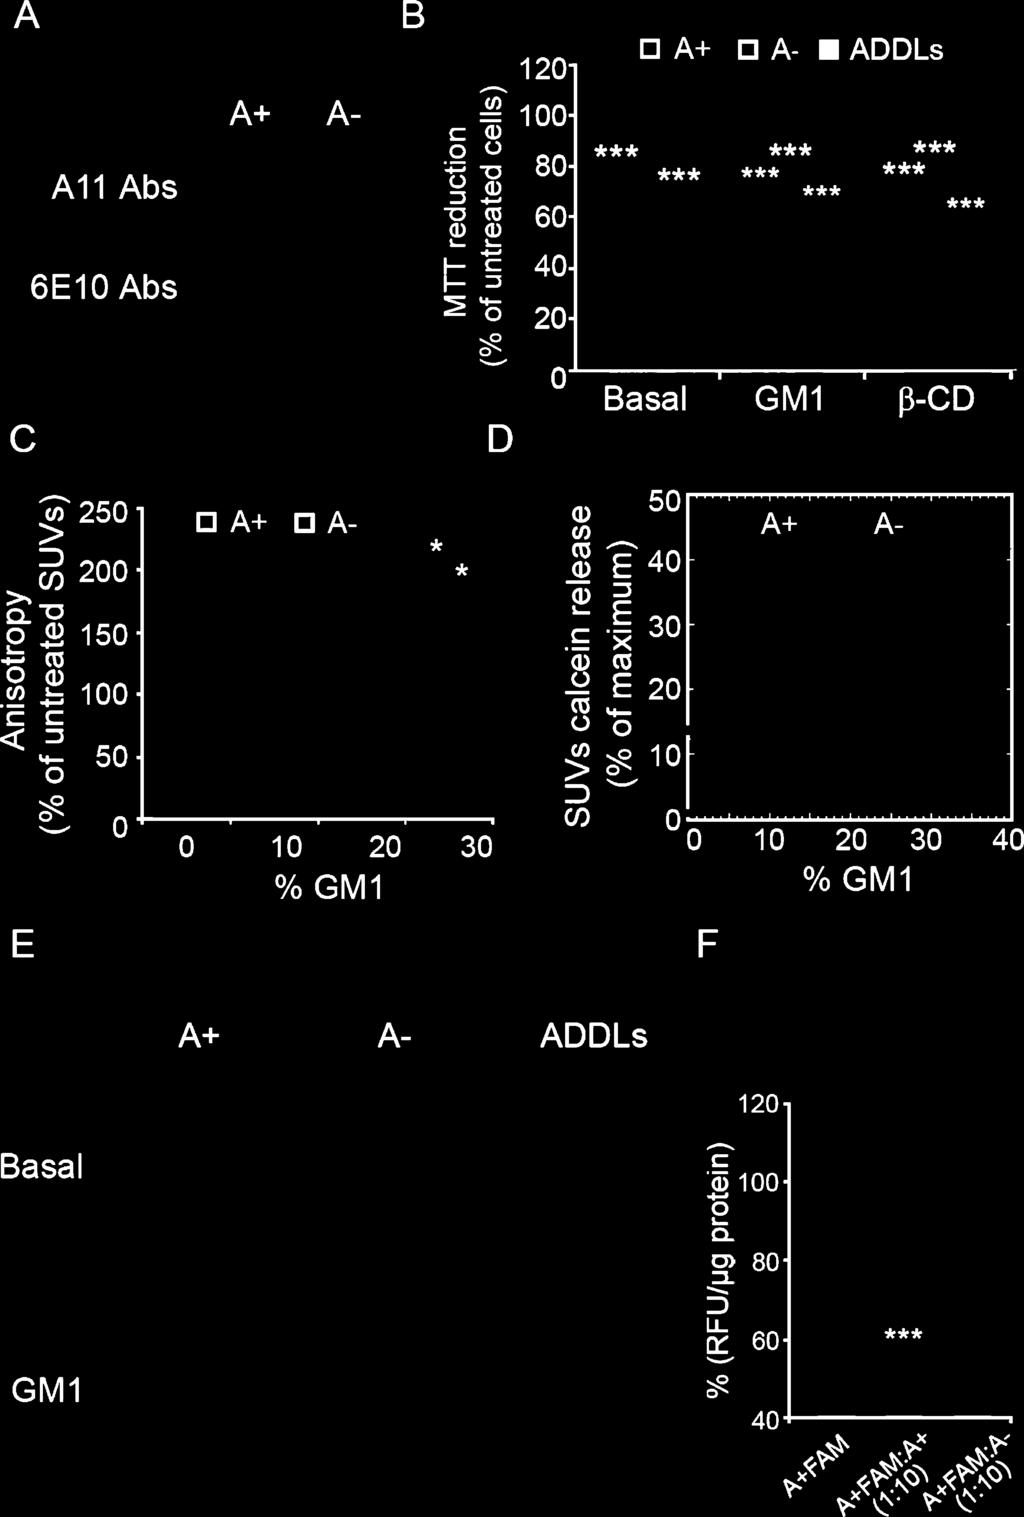 B) MTT reduction of basal, GM1-enriched (GM1), and cholesterol-depleted ( -CD) SH-SY5Y cells treated for 24 h with A+, A, and ADDLs oligomers (12 M, monomer equivalents).